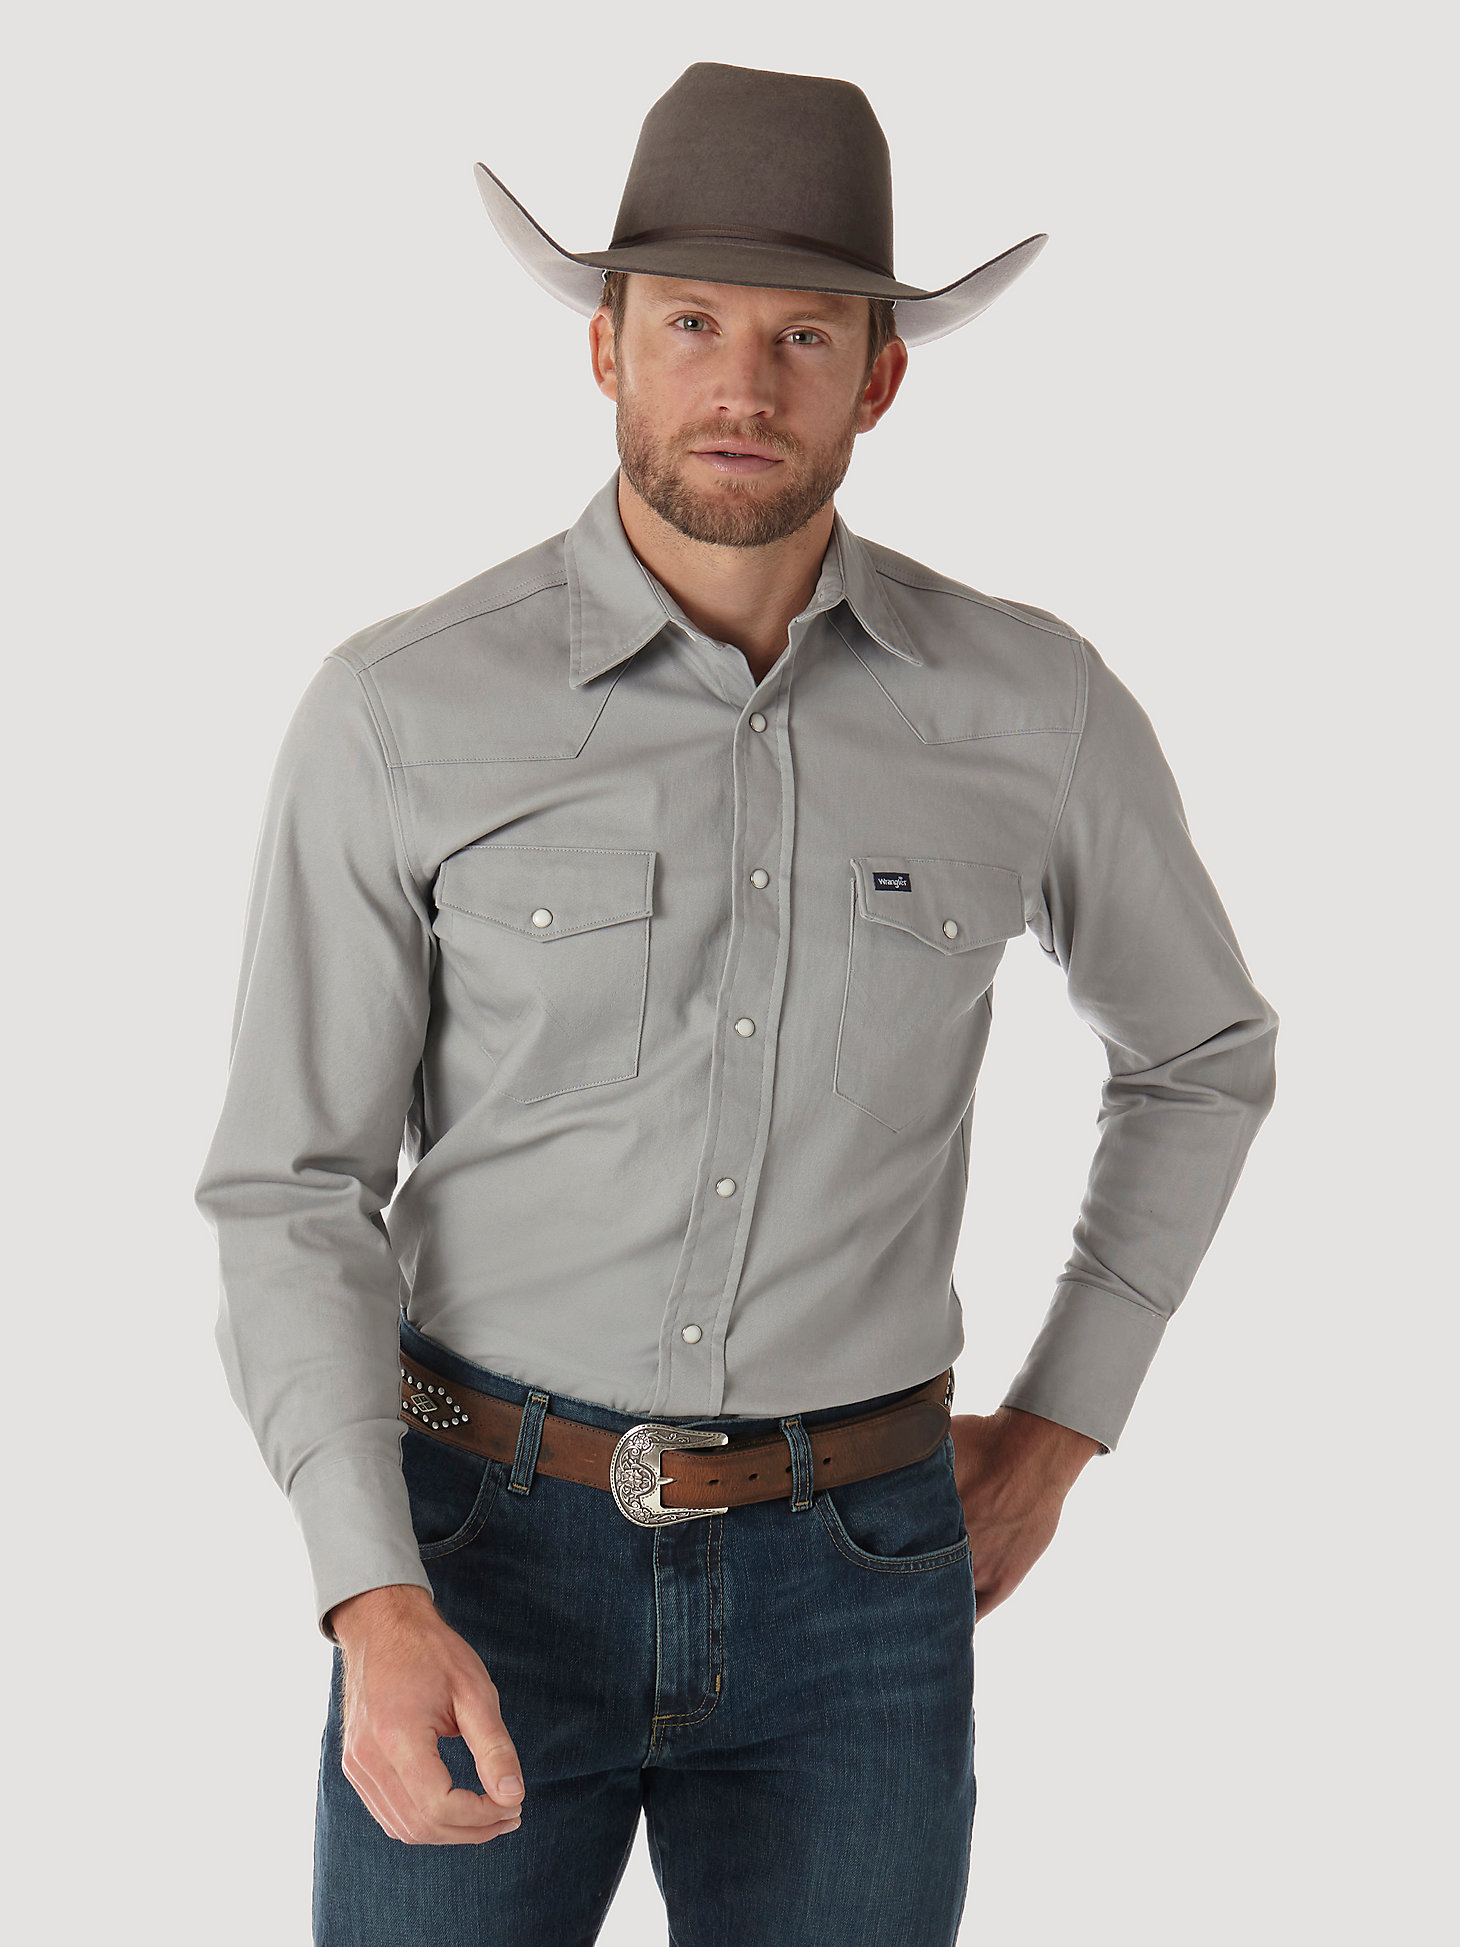 Premium Performance Advanced Comfort Cowboy Cut® Long Sleeve Spread Collar Solid Shirt in Cement alternative view 4